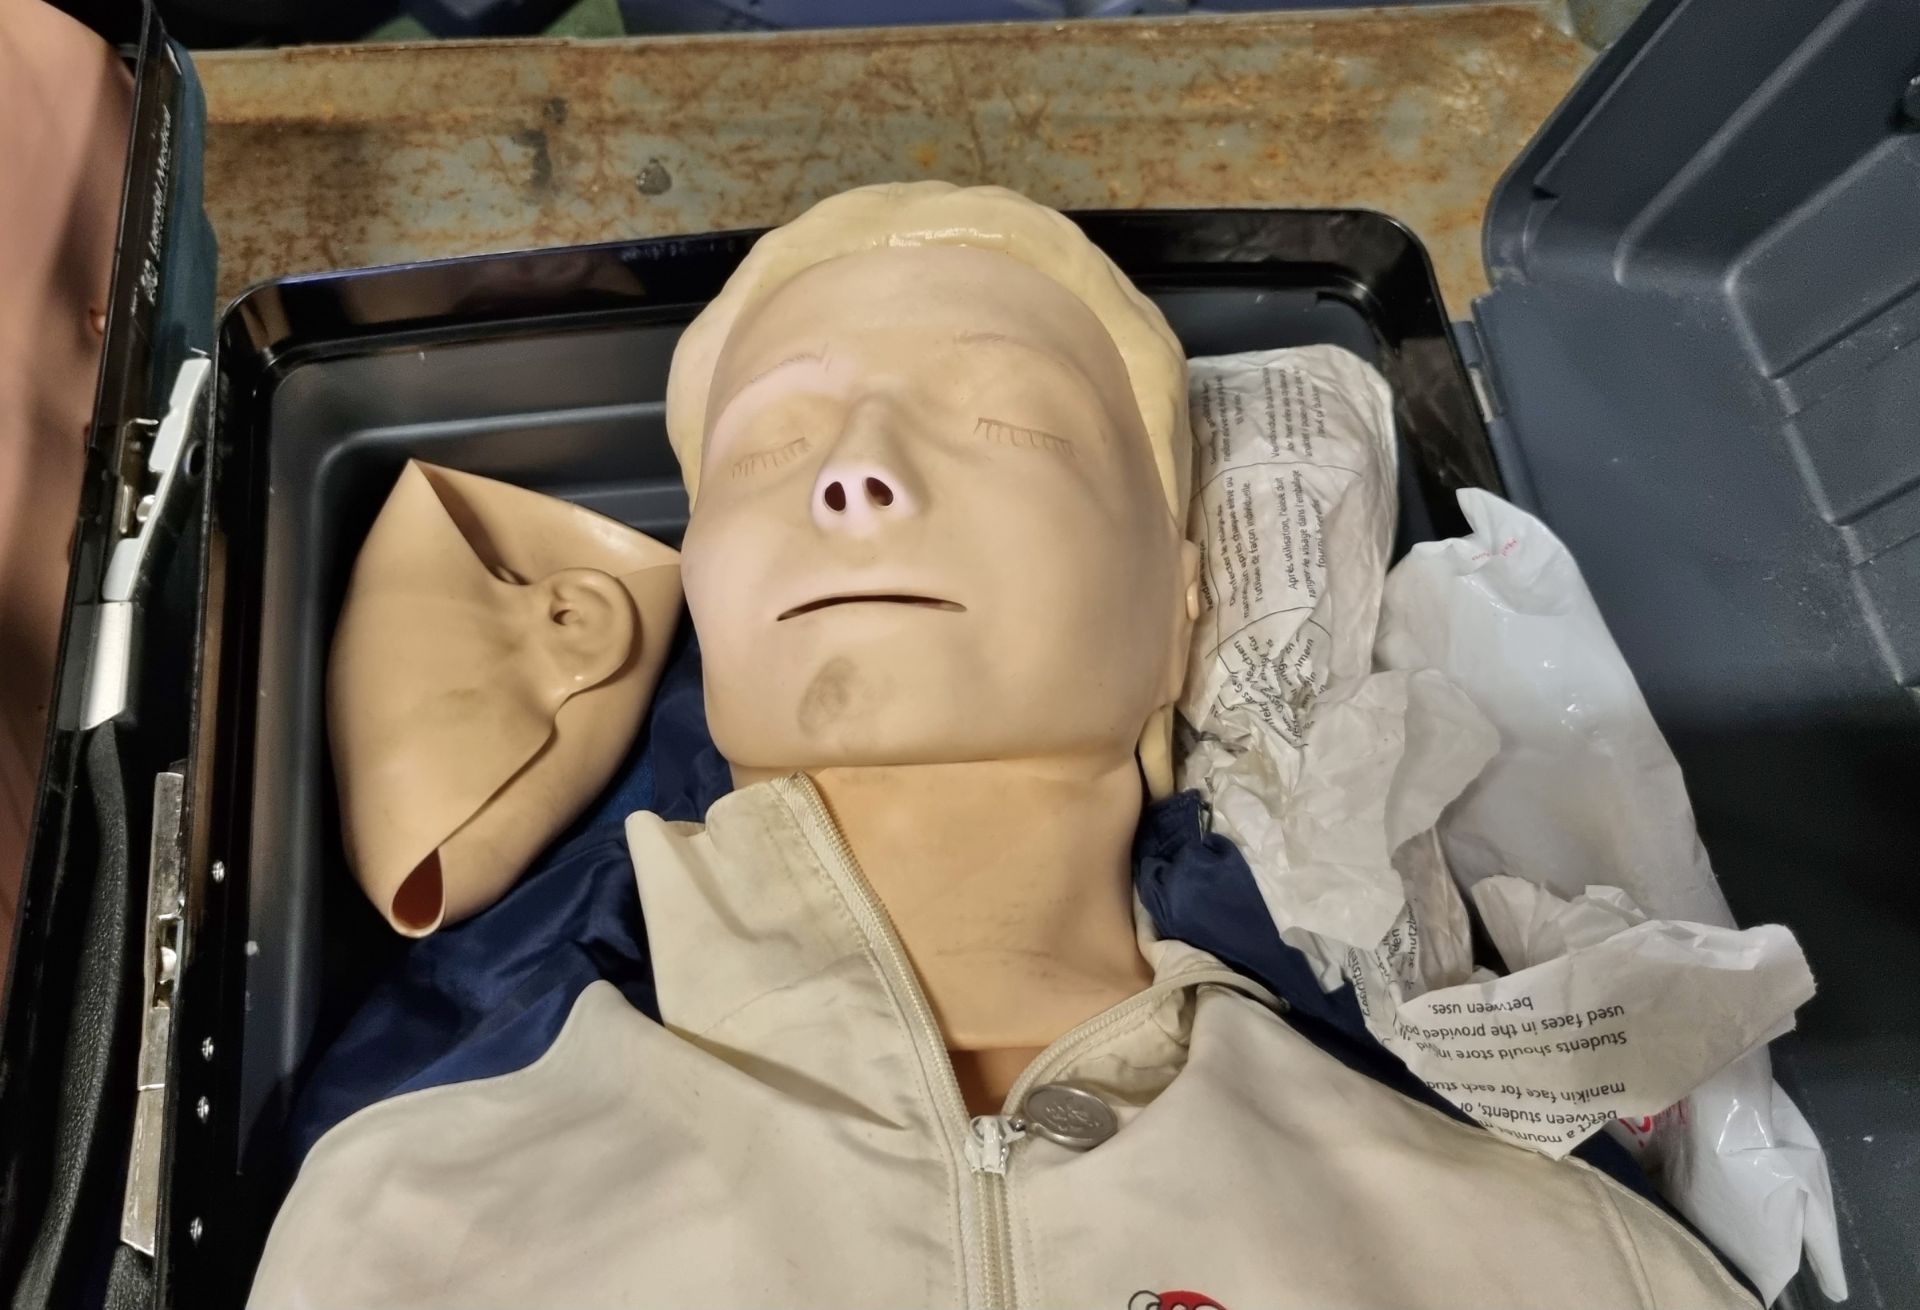 2x Laerdal Resusci Anne Torso CPR medical training dummies in cases - Image 4 of 6